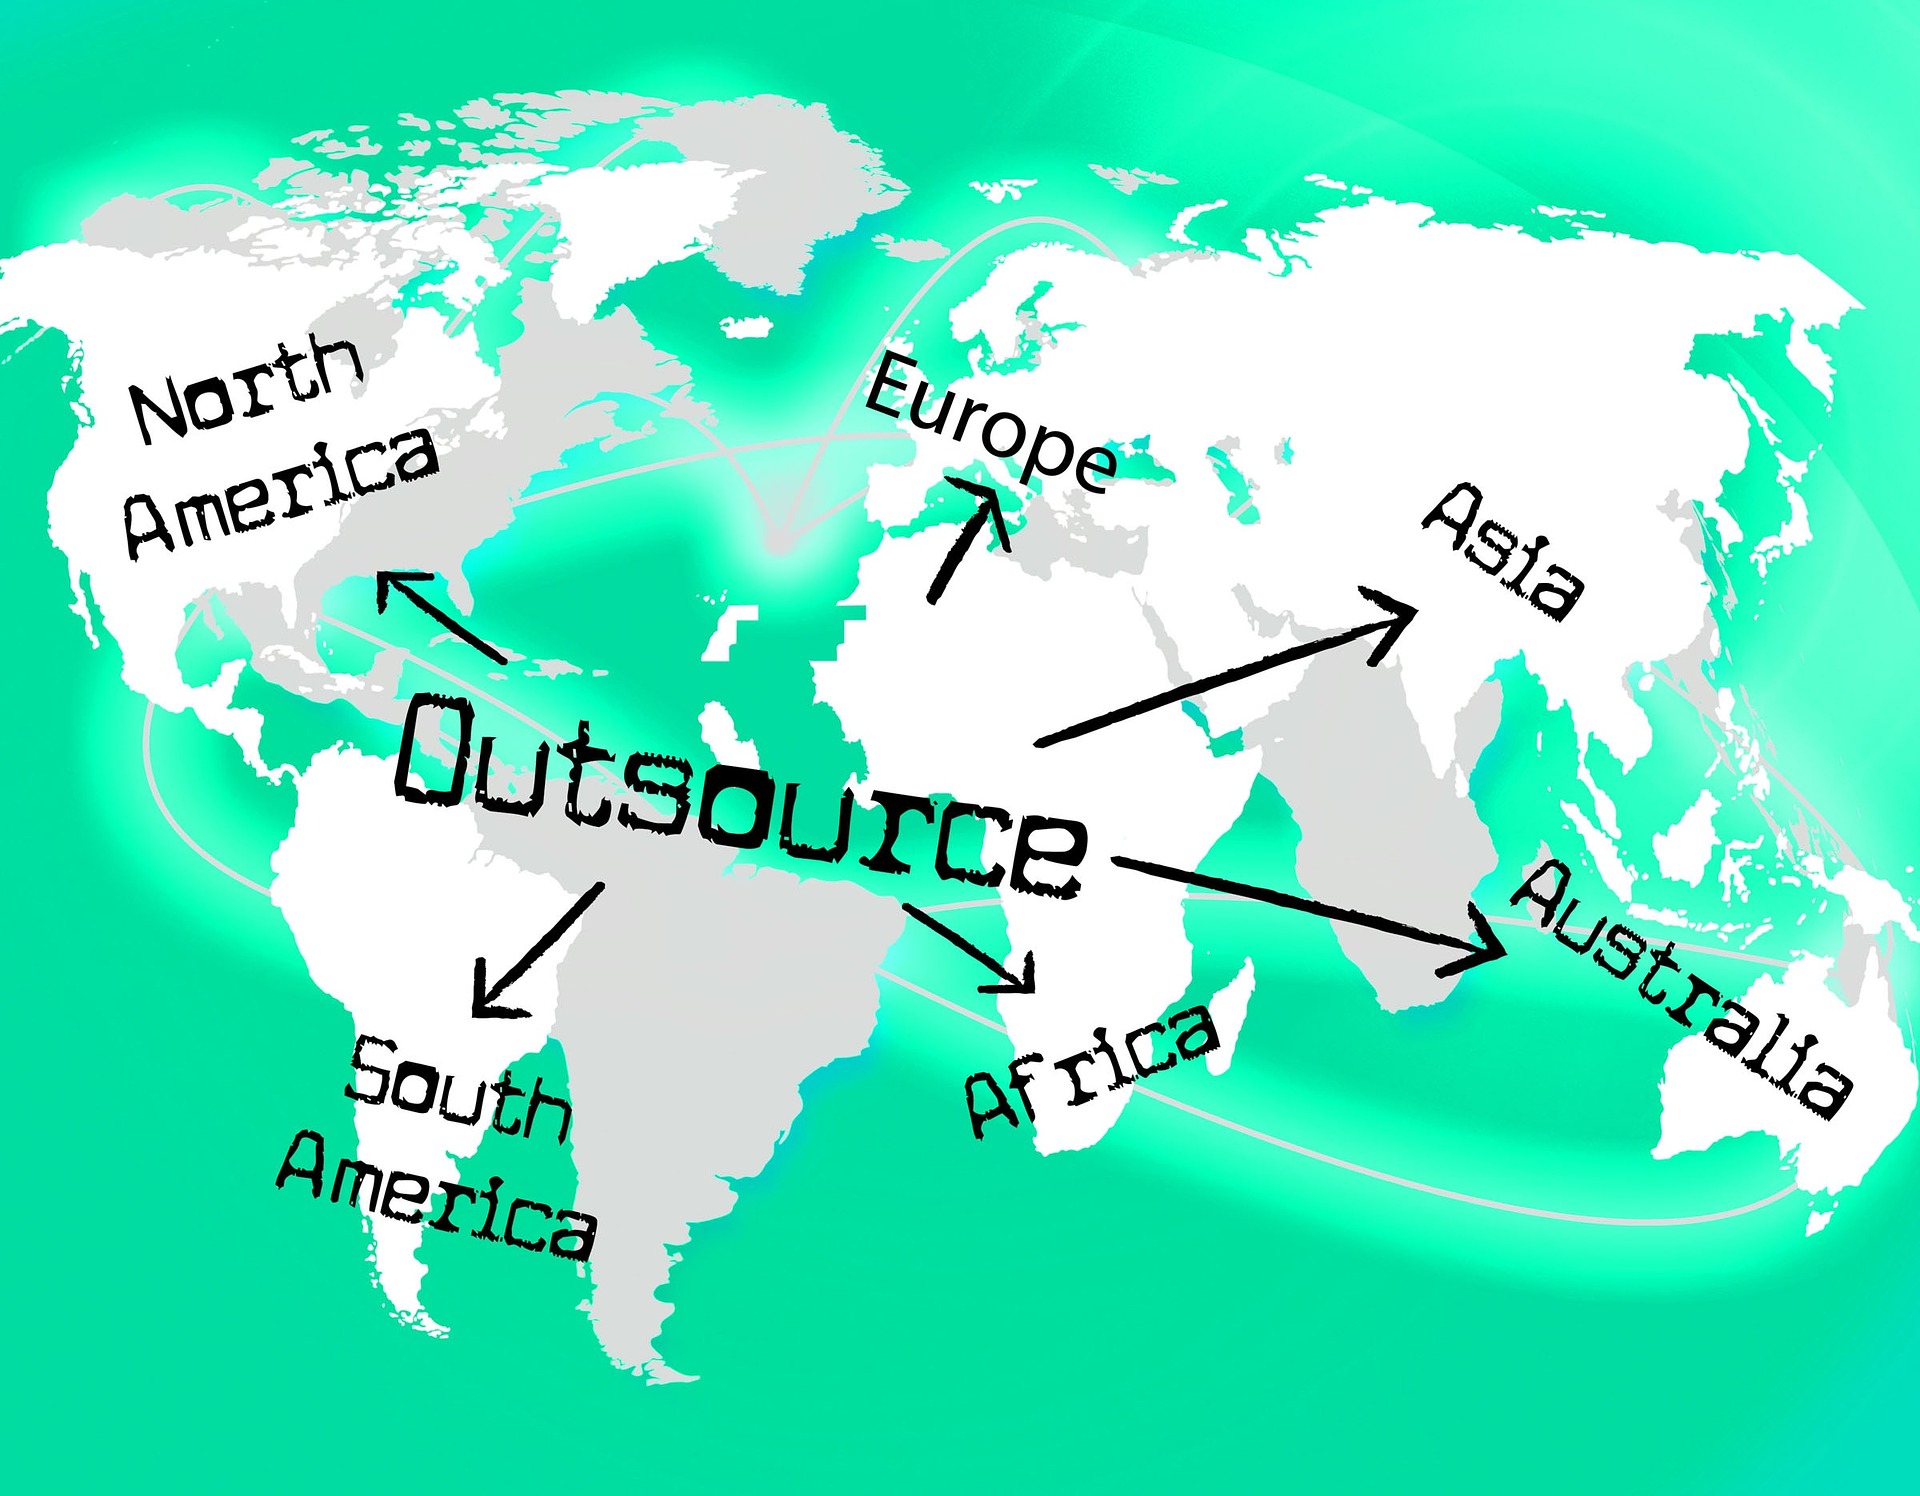 Bangladesh is the best place for outsourcing